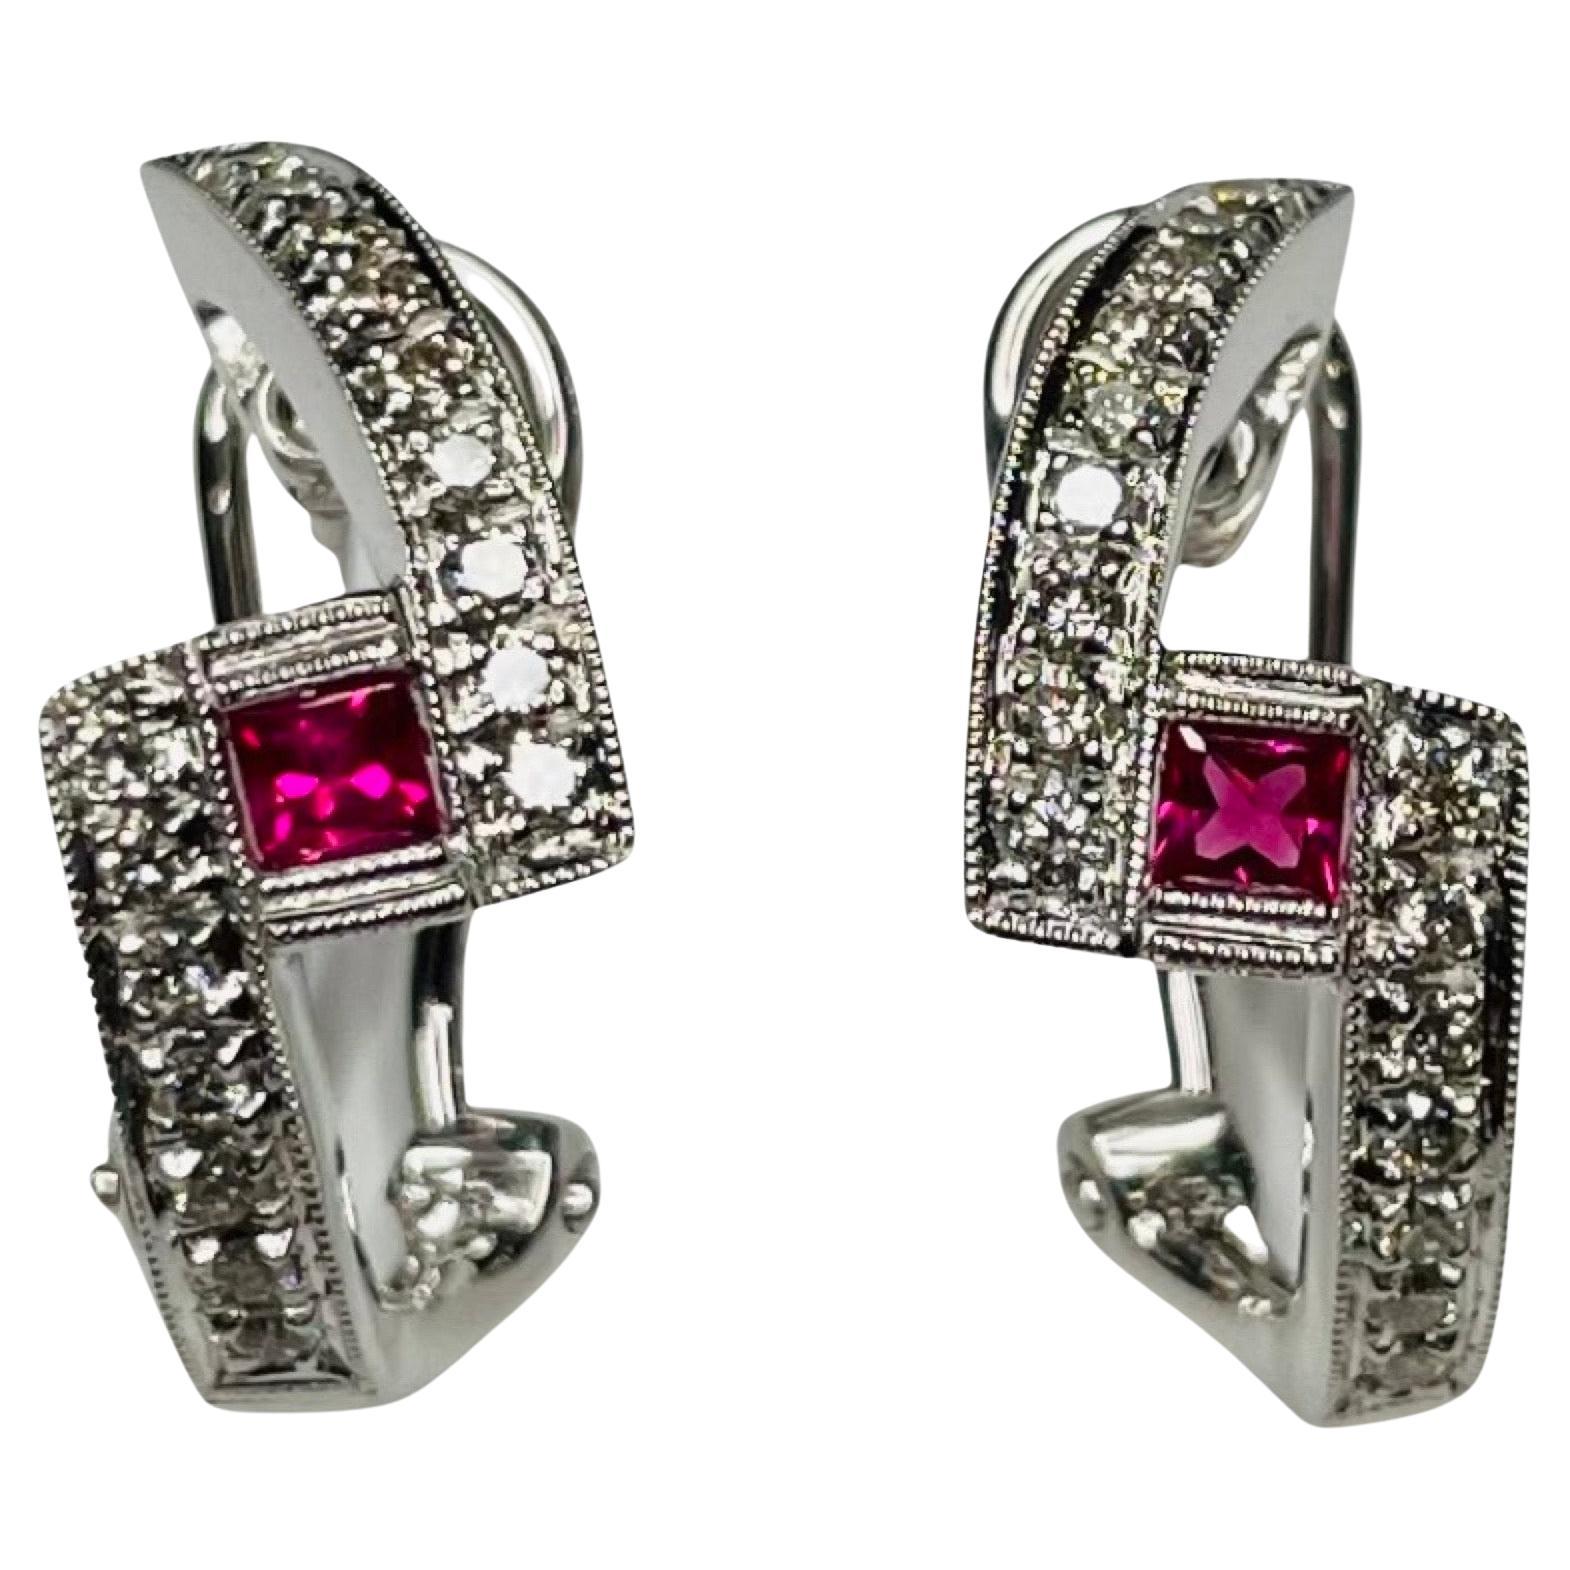 Simon G 18K White Gold Natural Ruby and Diamond Earrings. The earrings are 18.0 mm long. The rubies have a total weight of 0.23 carats. There are 32 full cut round brilliant diamonds of VS clarity and G color for a total diamond weight of 0.30